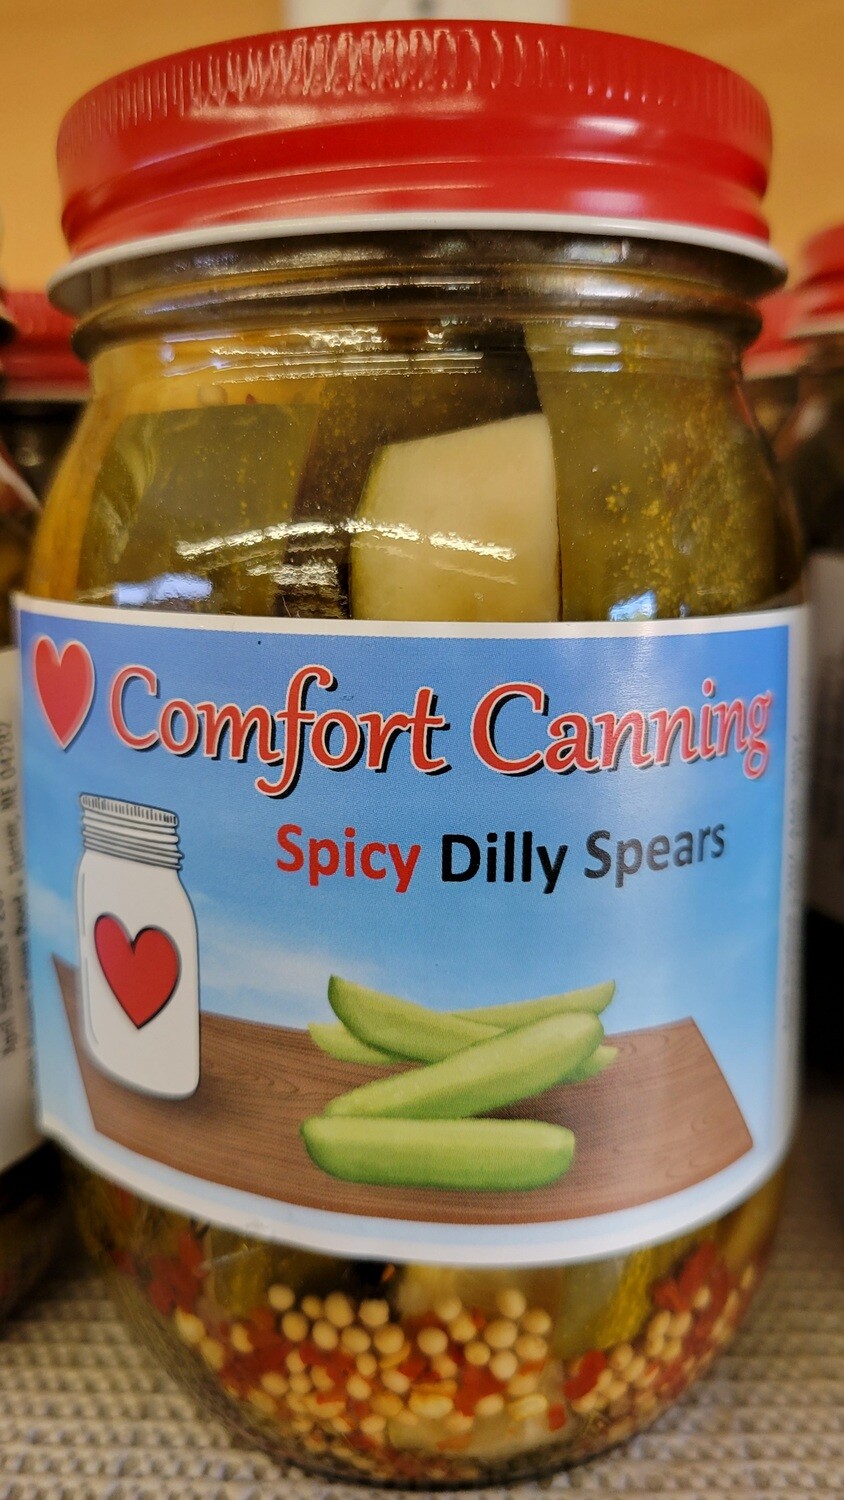 Comfort Canning - Spicy Dilly Spears